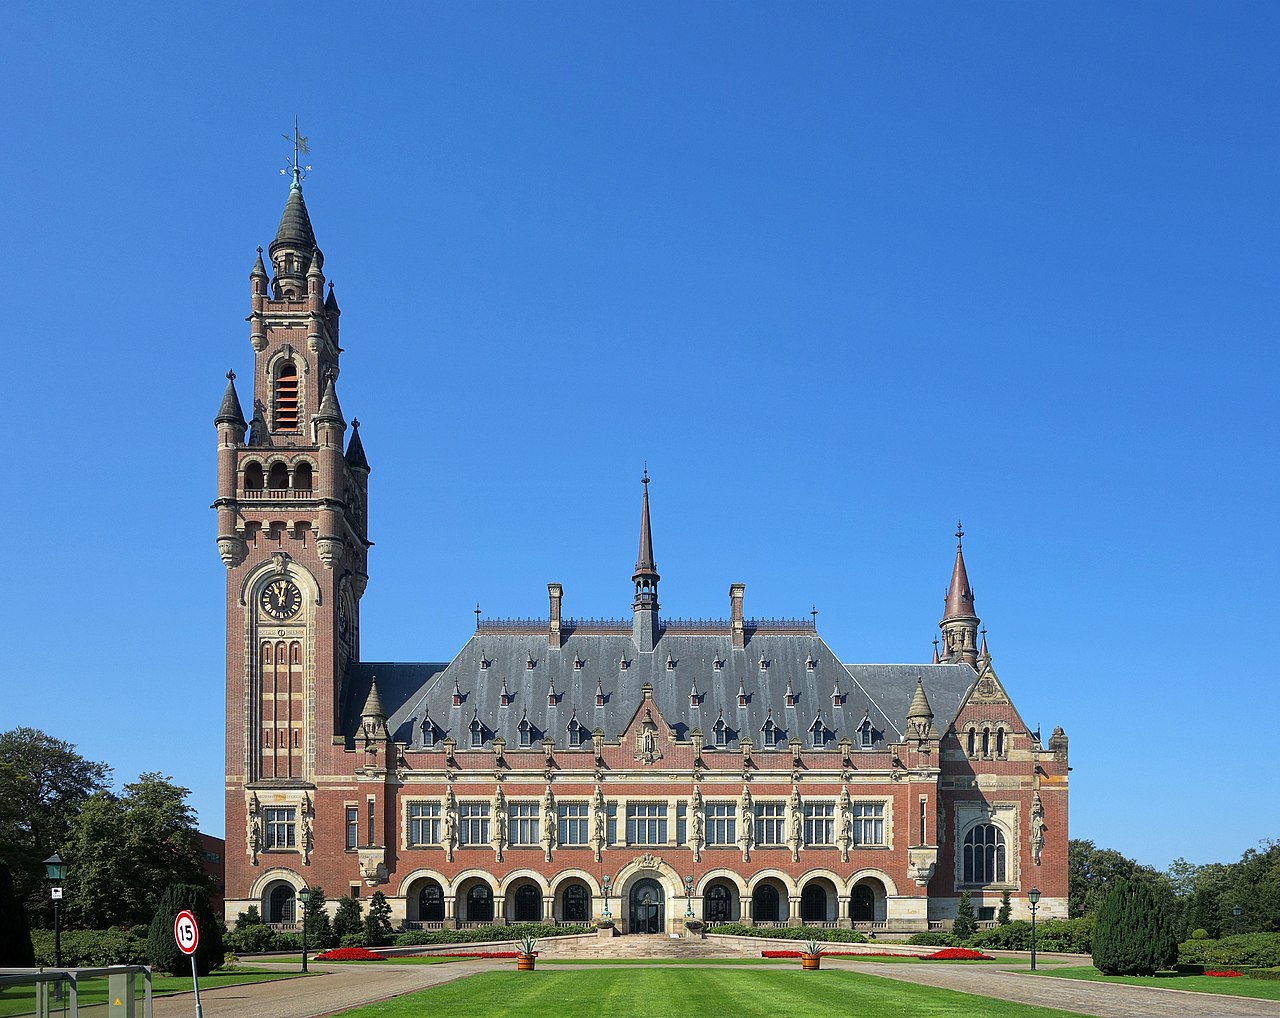 Peace Palace, The Hague: seat of the International Court of Justice.
Photo by Velvet, CC BY-SA 4.0.